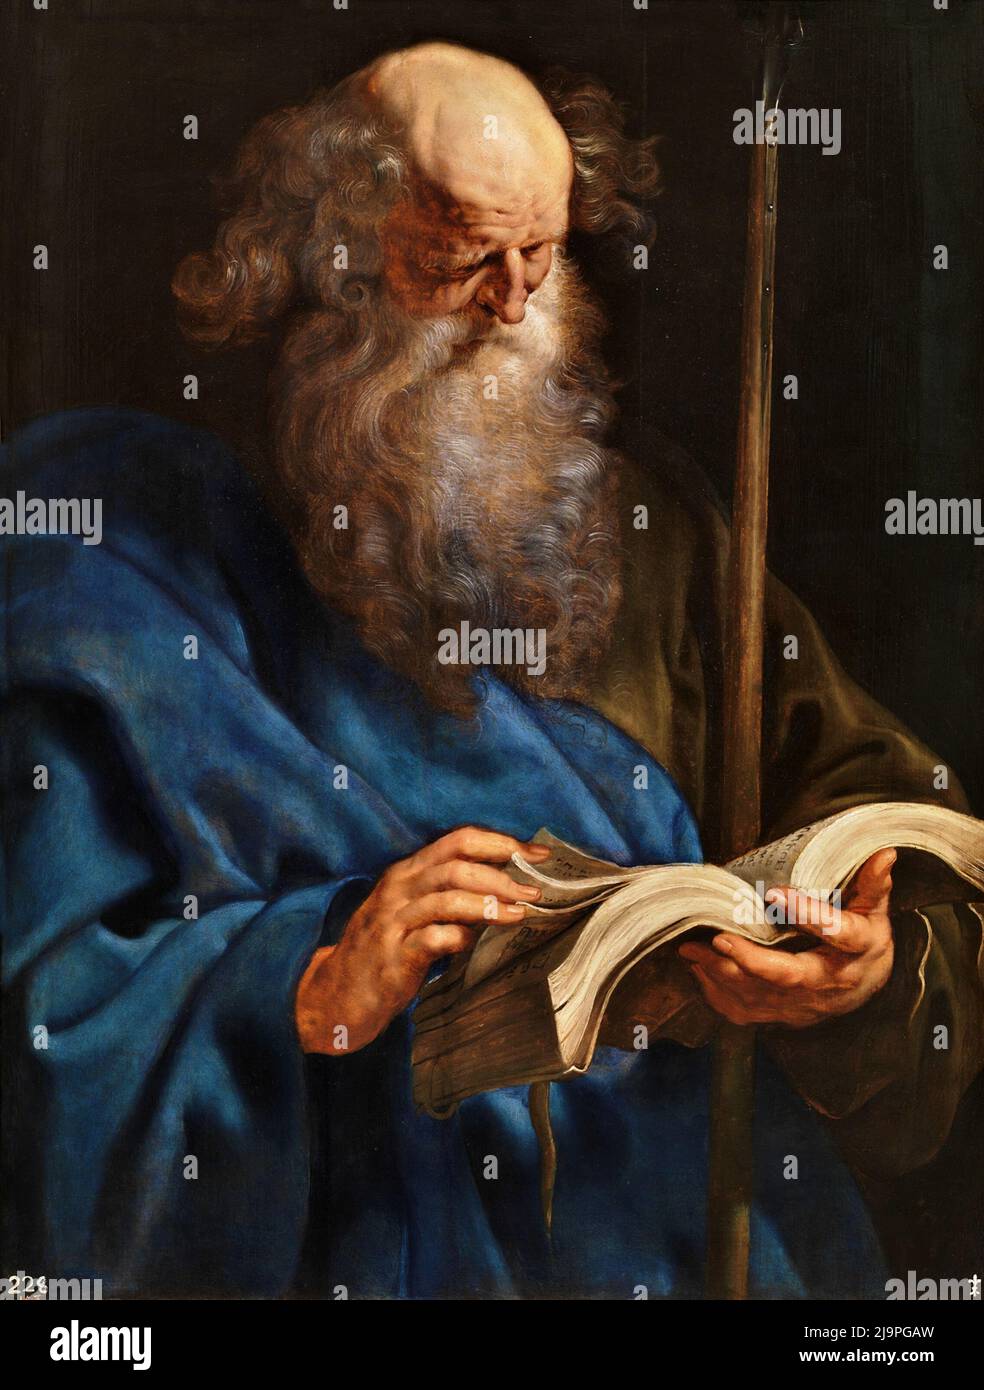 Saint Thomas, one of Jesus's 12 disciples, painted by Peter Paul Rubens Stock Photo